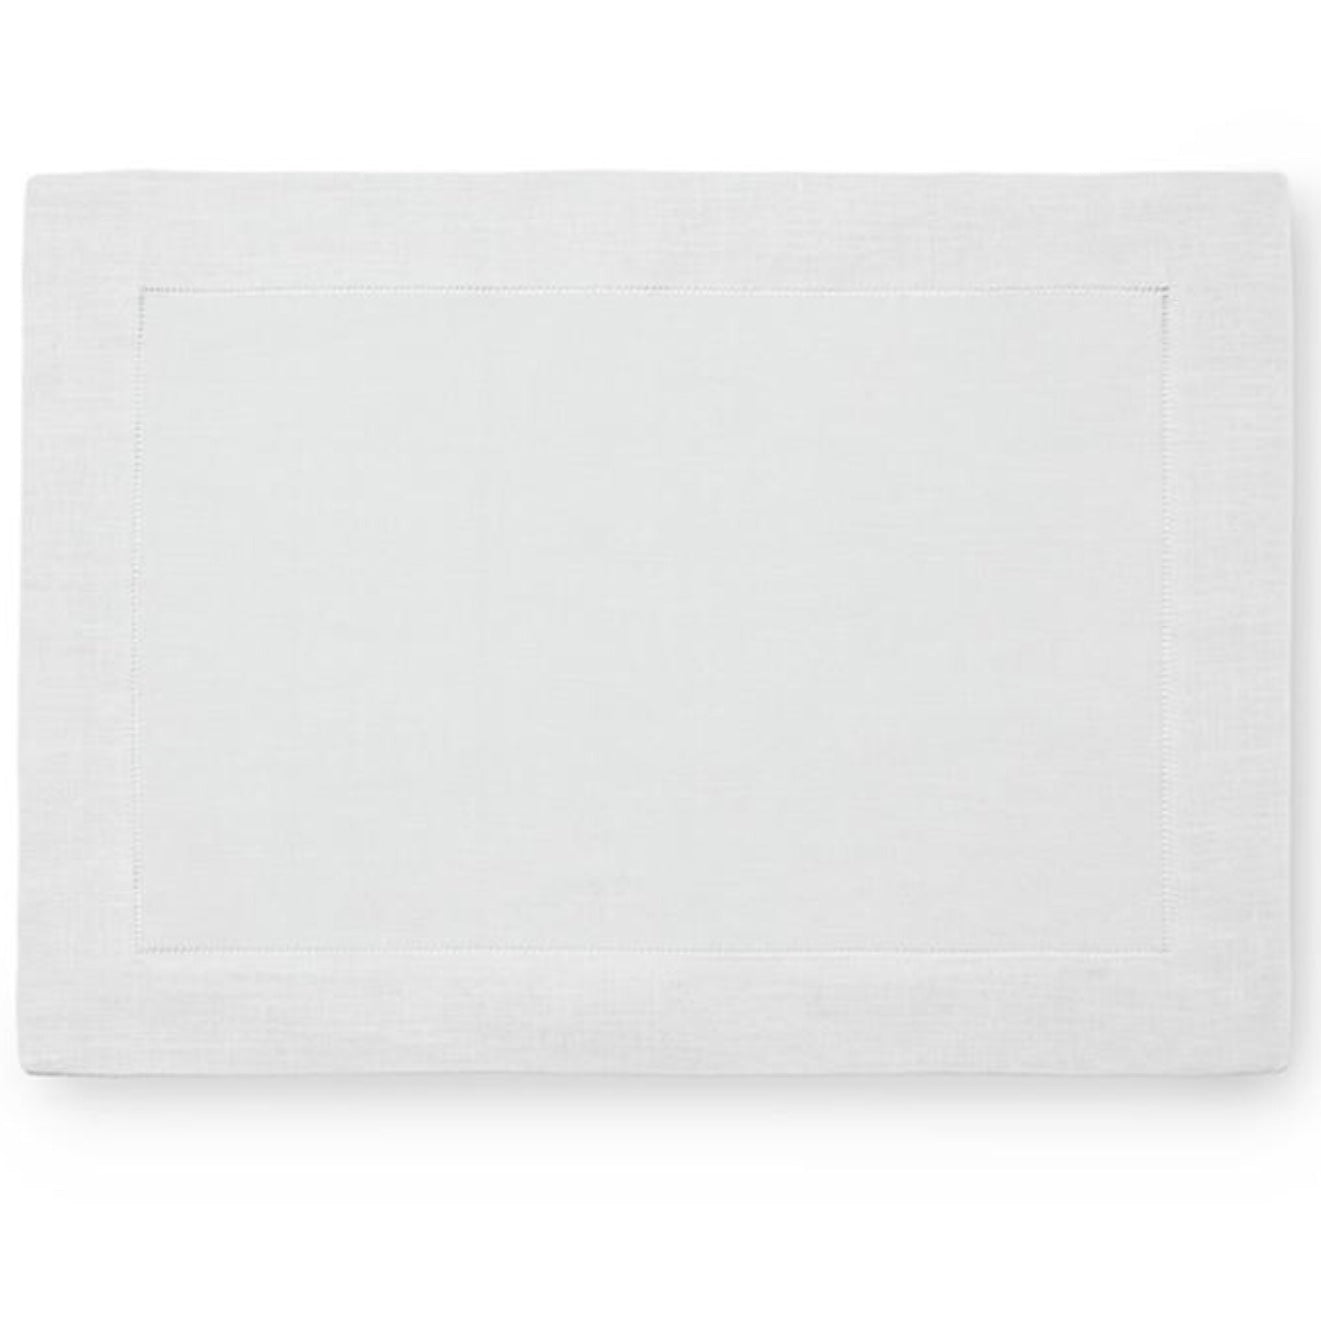 White Hemstitched Linen Placemat Set of 4